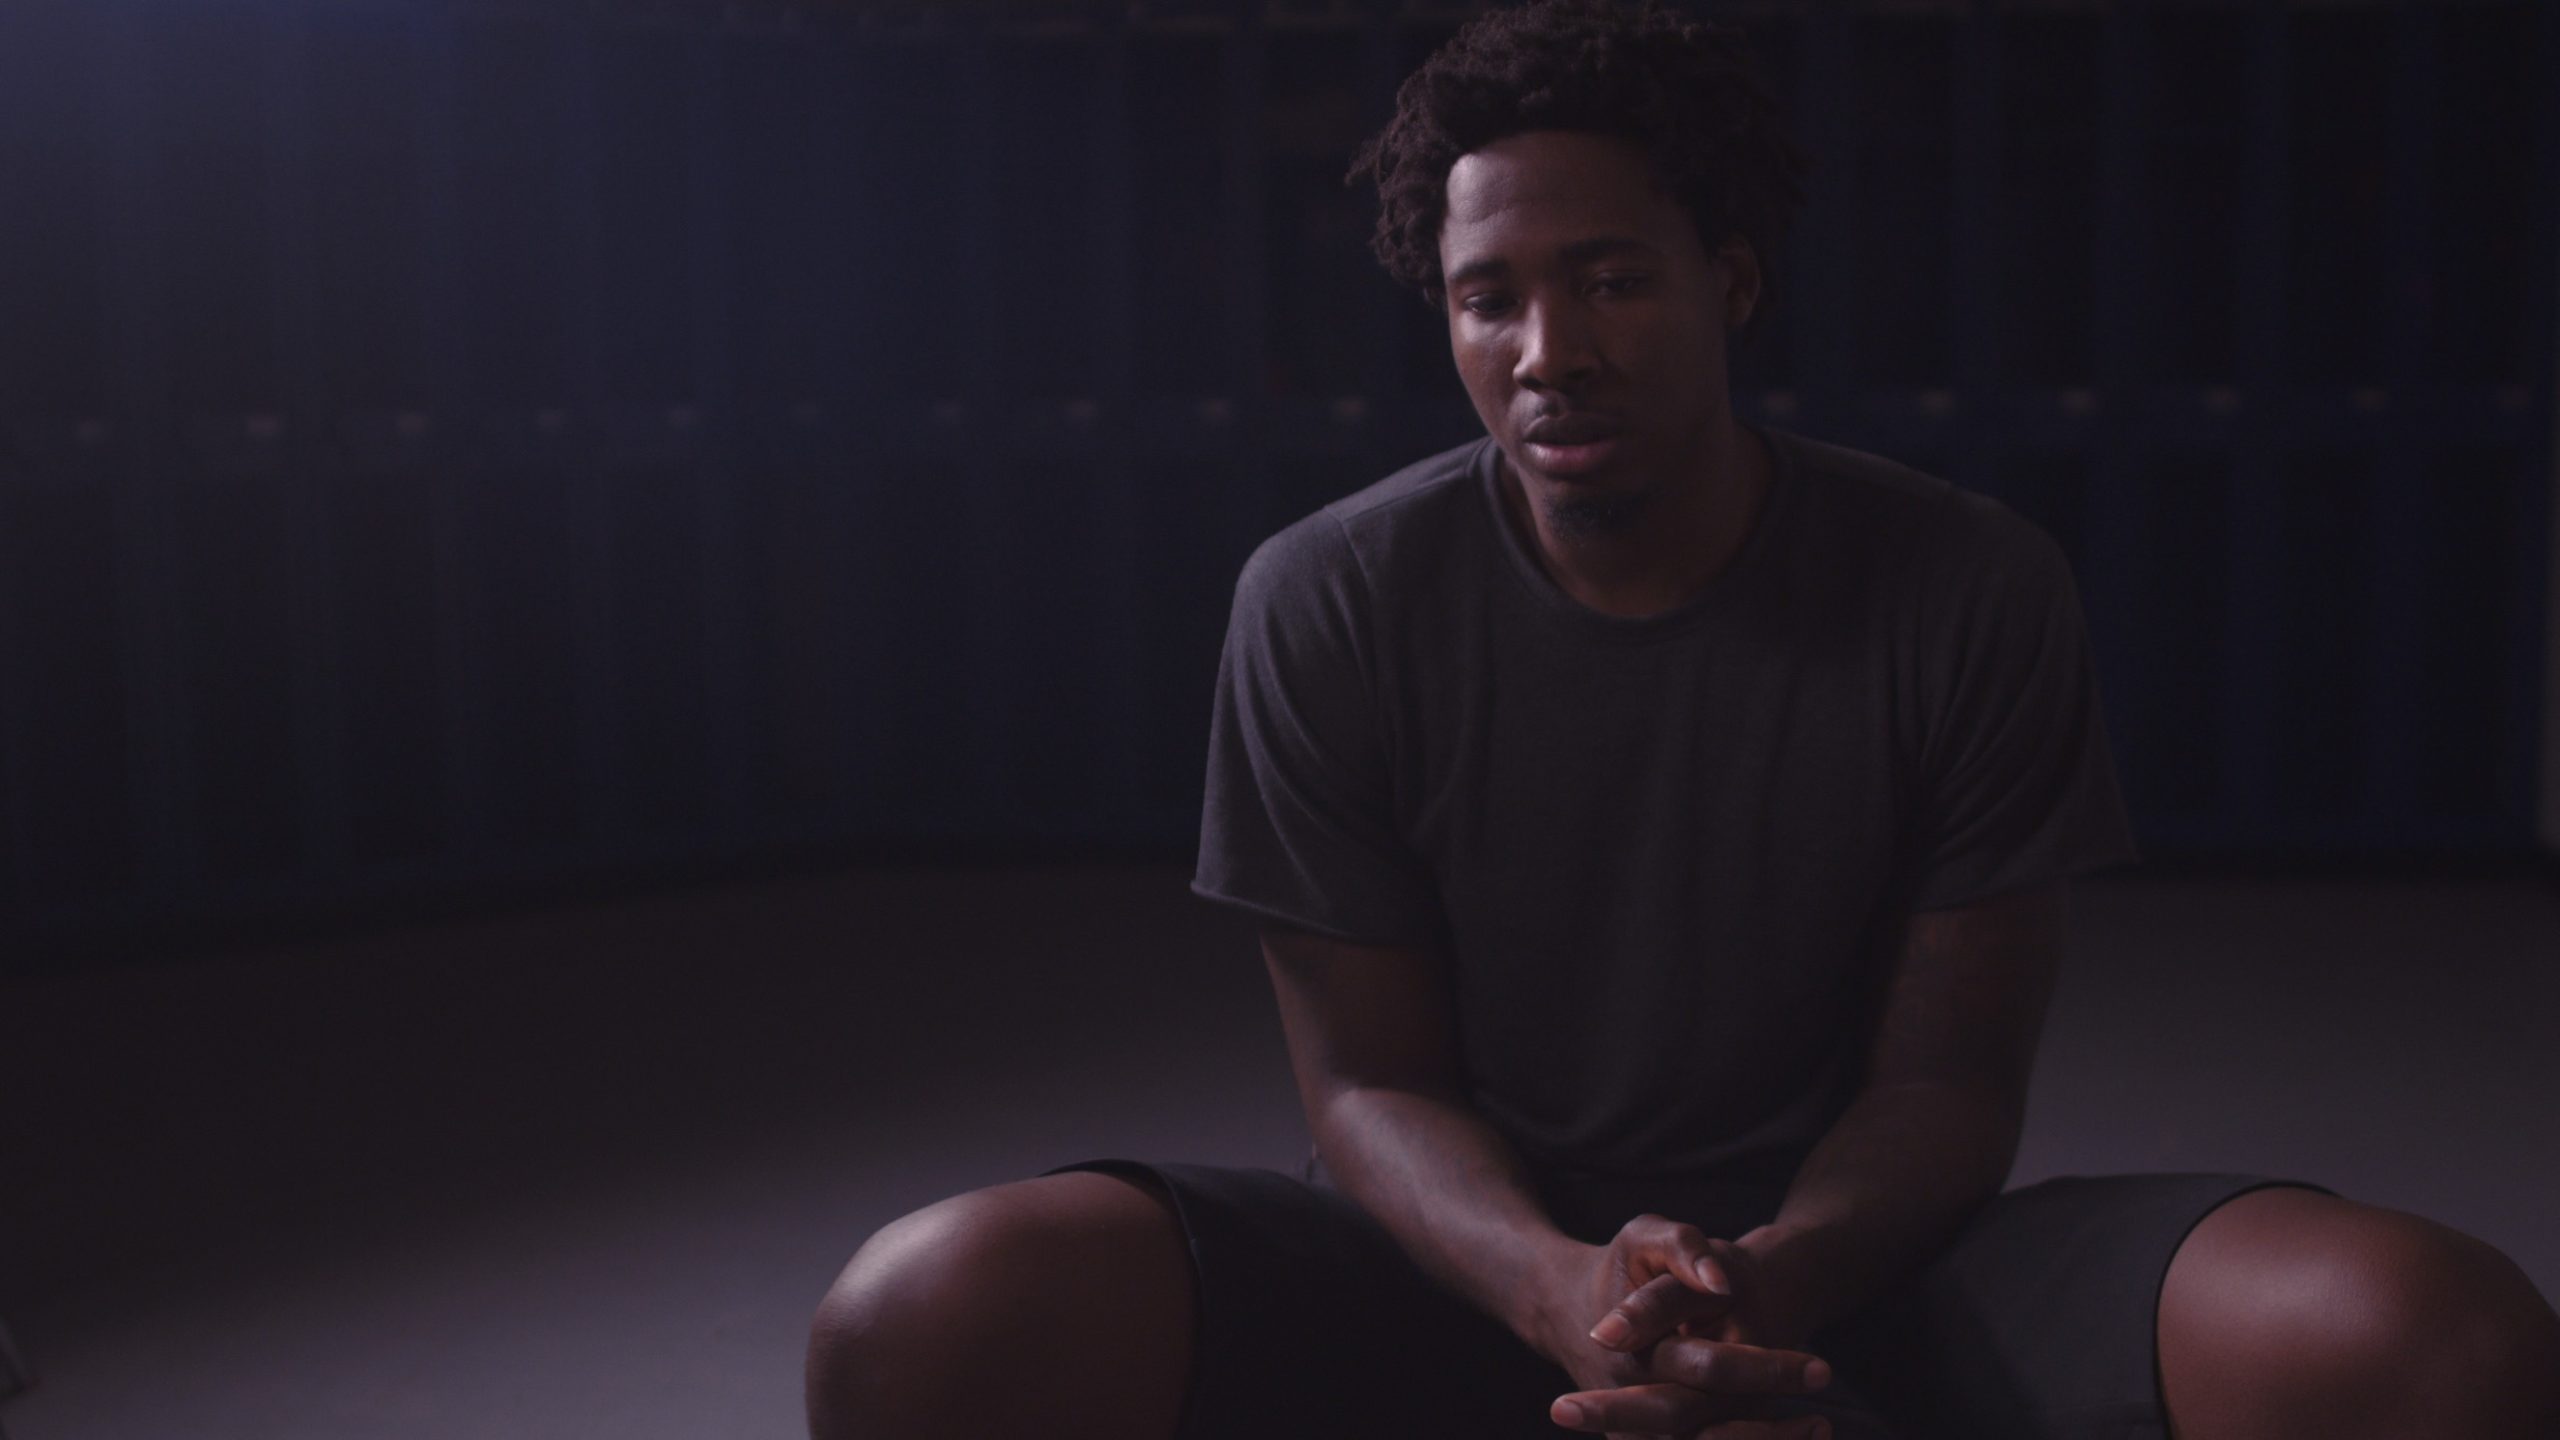 Ed Davis Sportsblog, a documentary mini series African American man wearing a gray t shirt and black shorts sitting and looking down